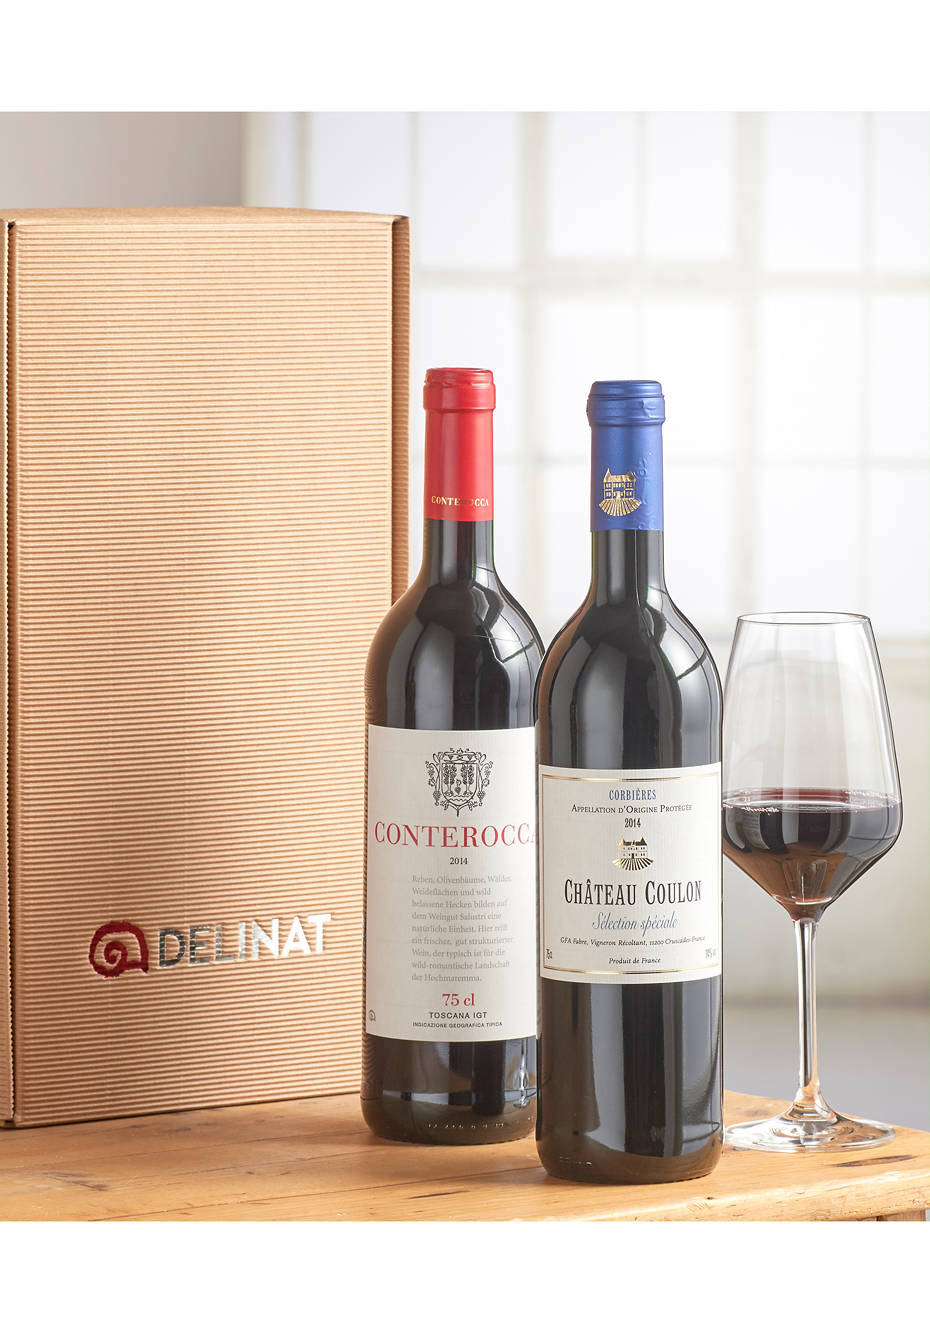 Two organic wines from Delinat